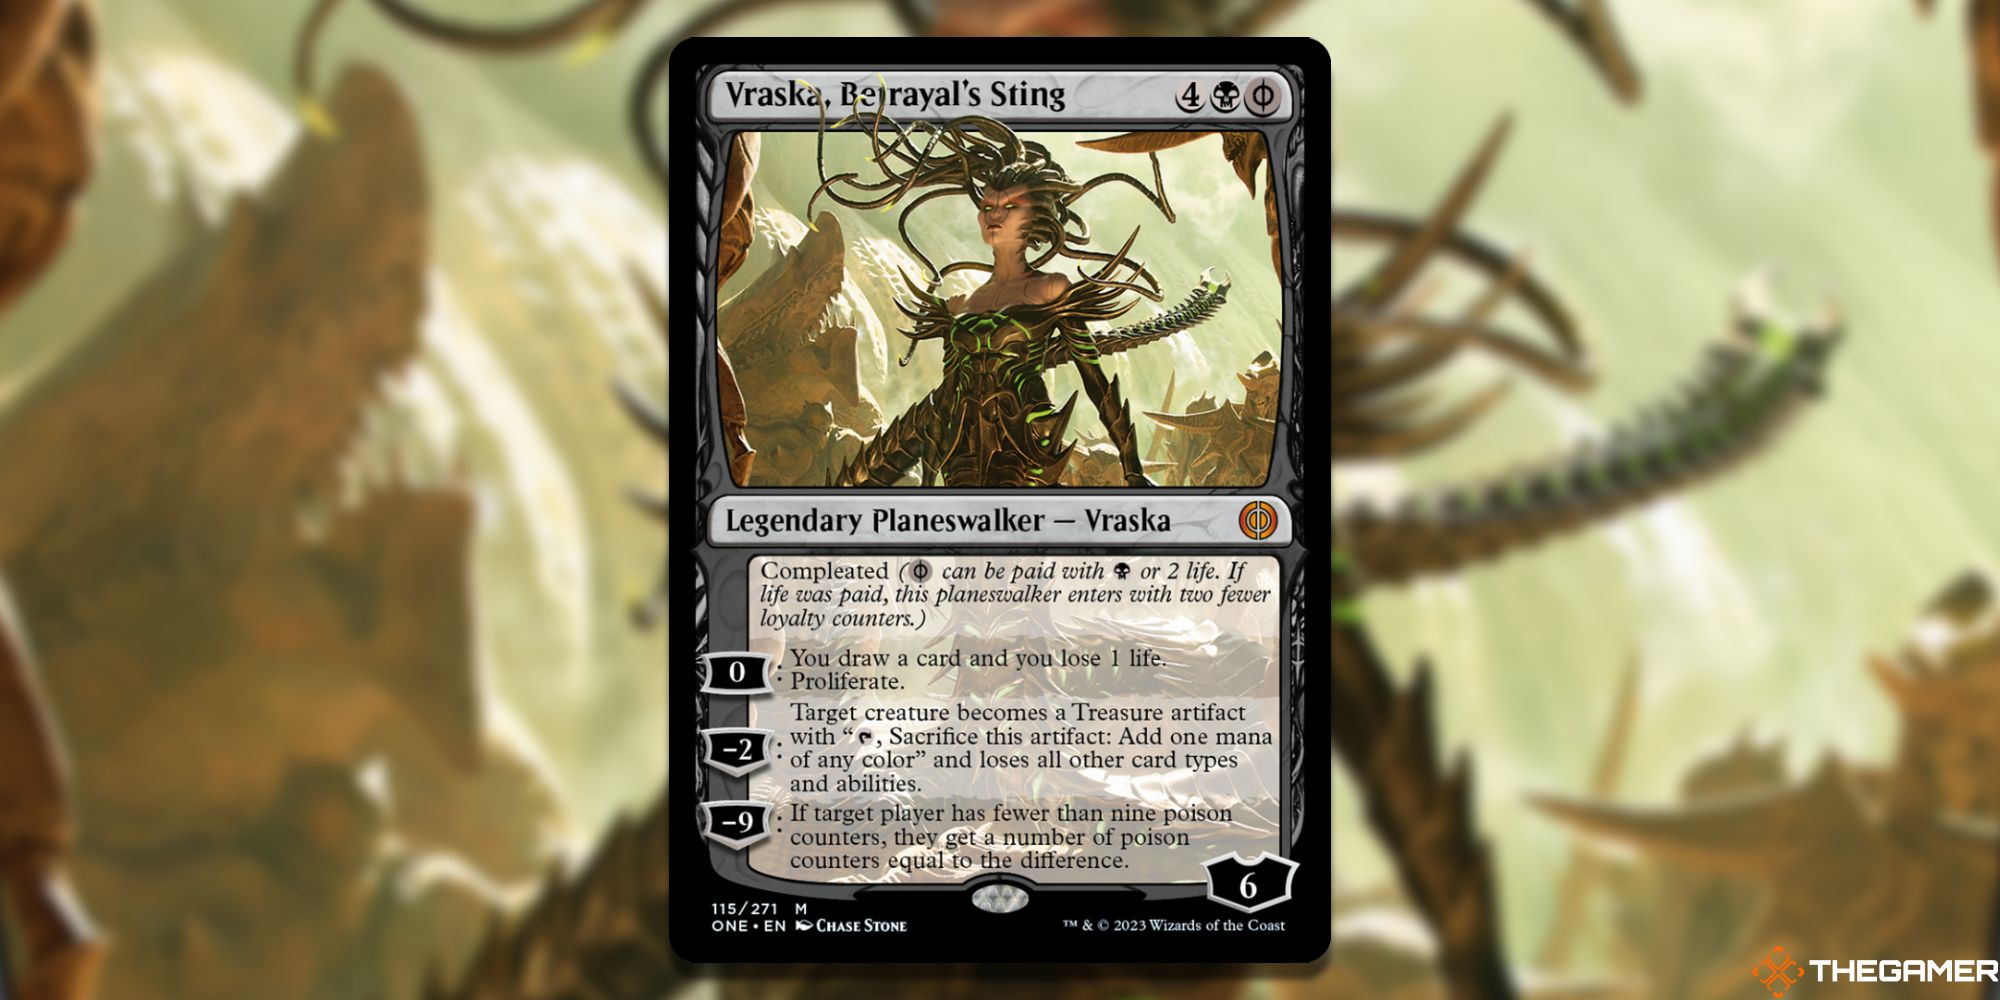 The card Vraska, Betrayal's Sting from Magic: The Gathering.